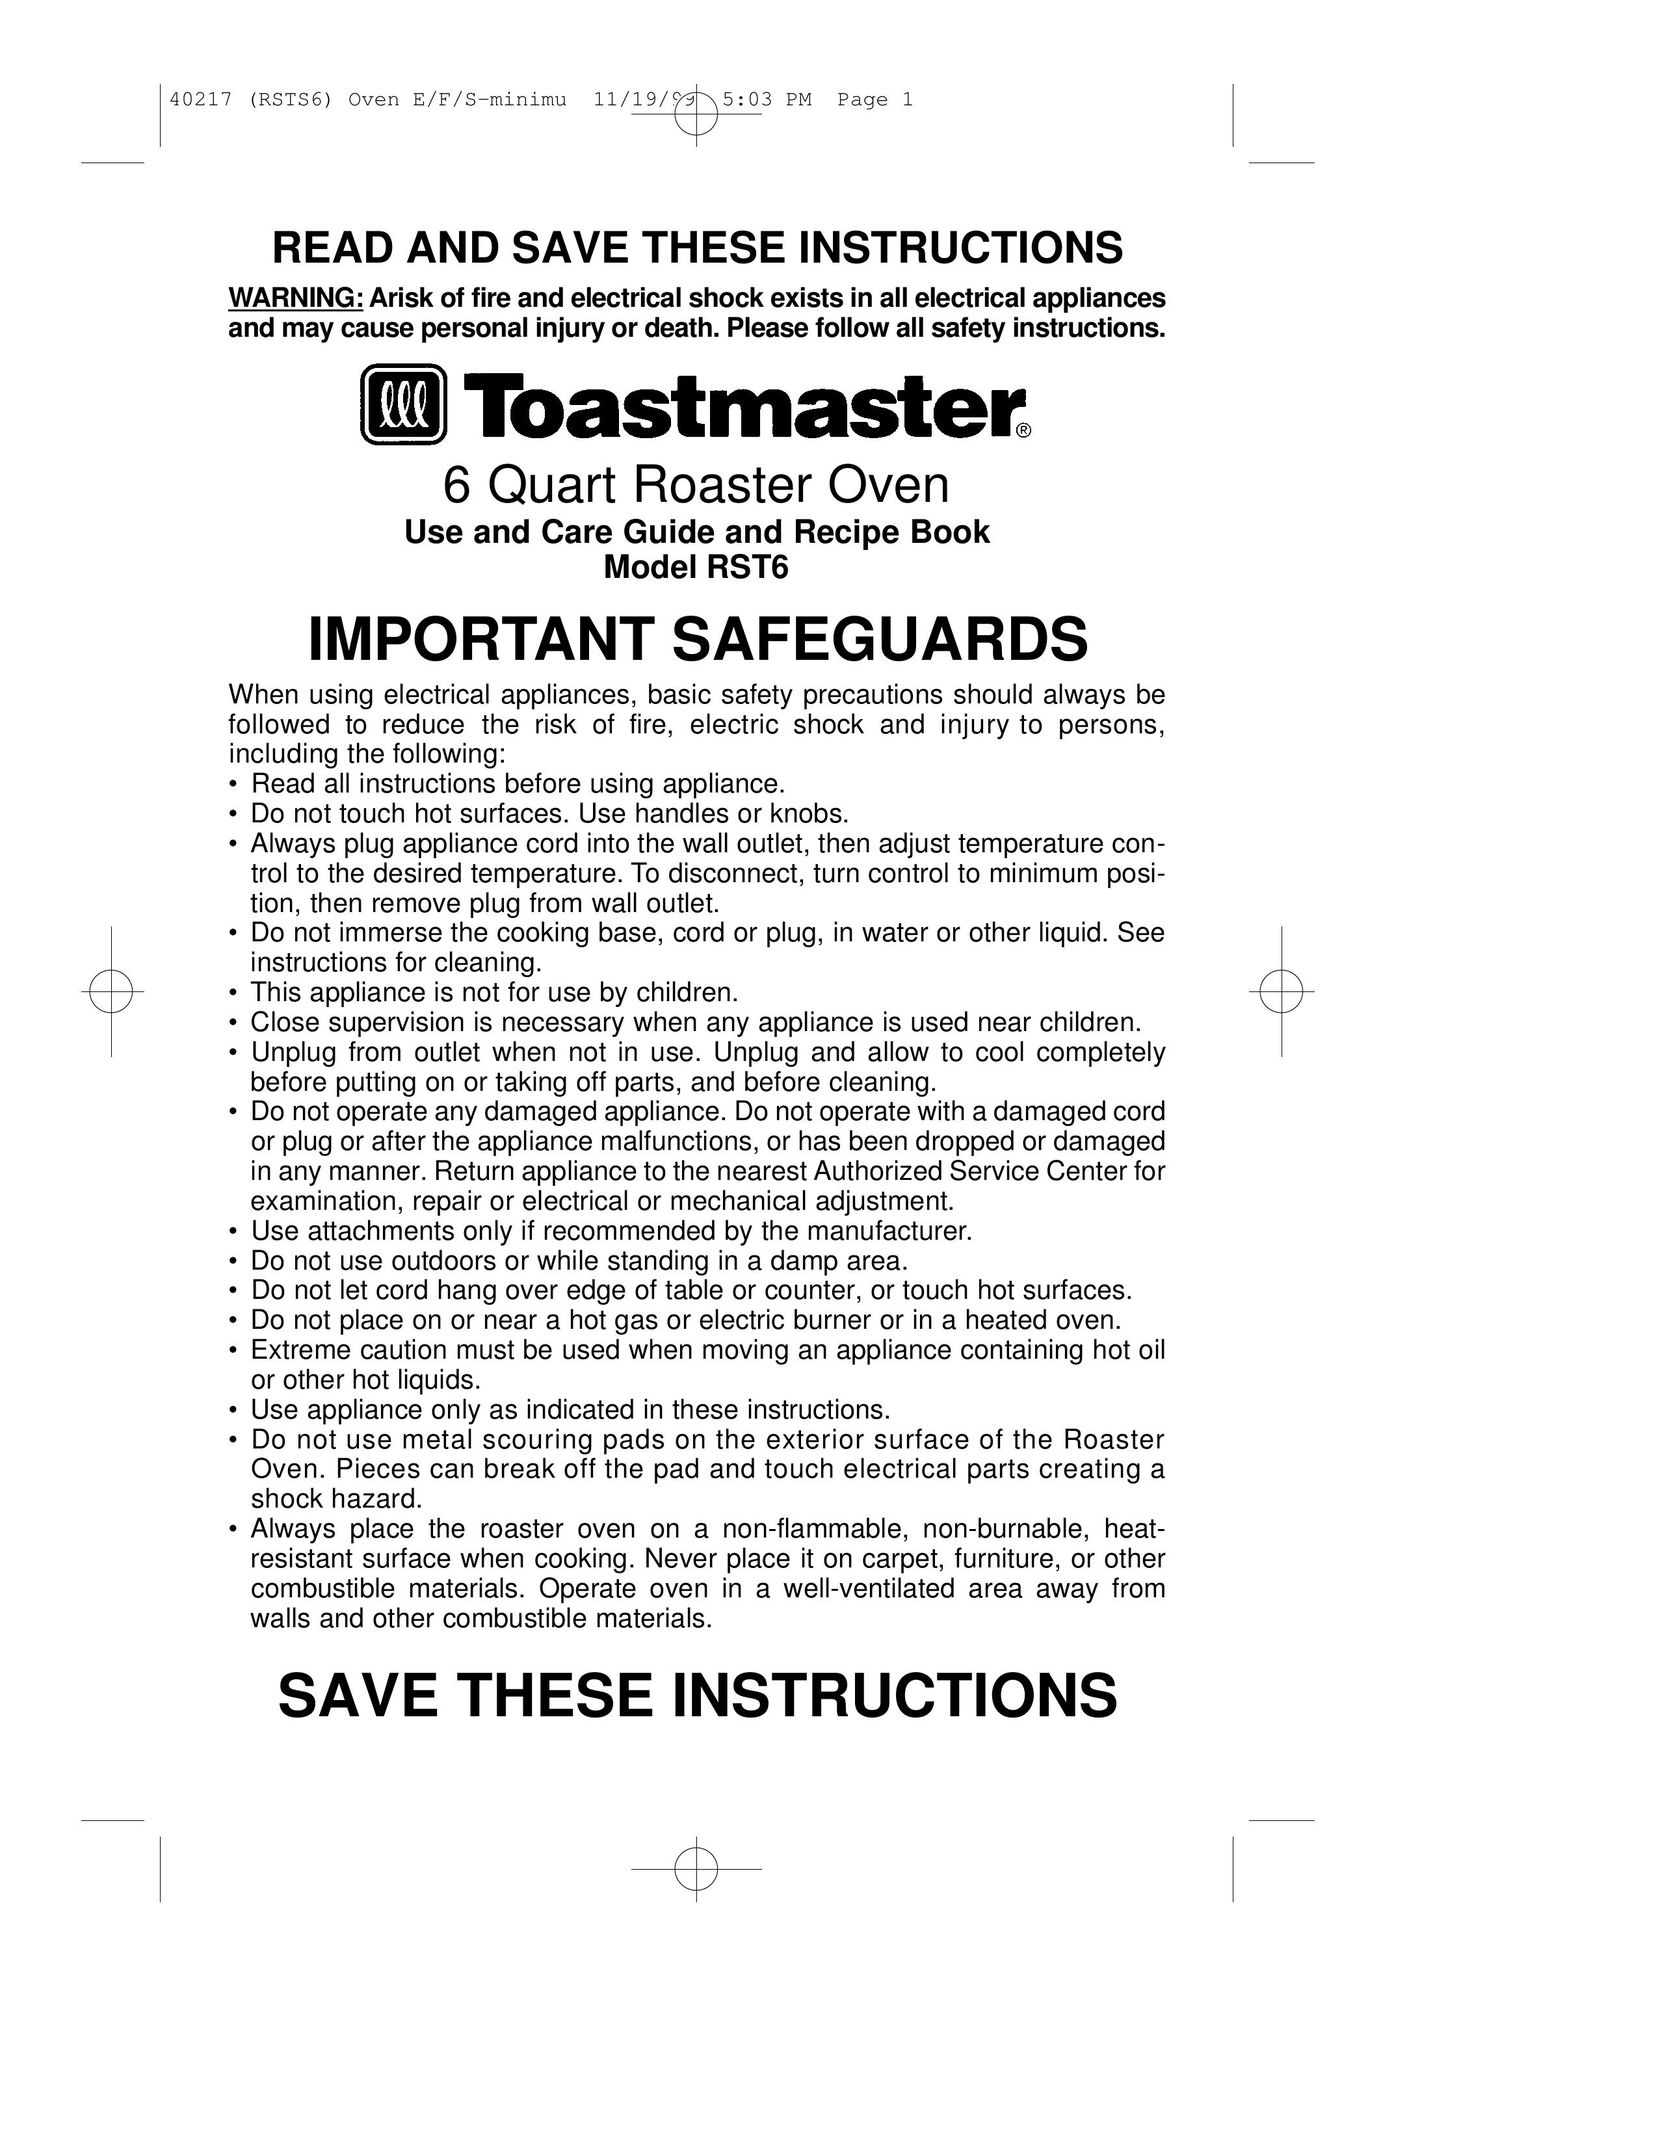 Toastmaster RST6 Oven User Manual